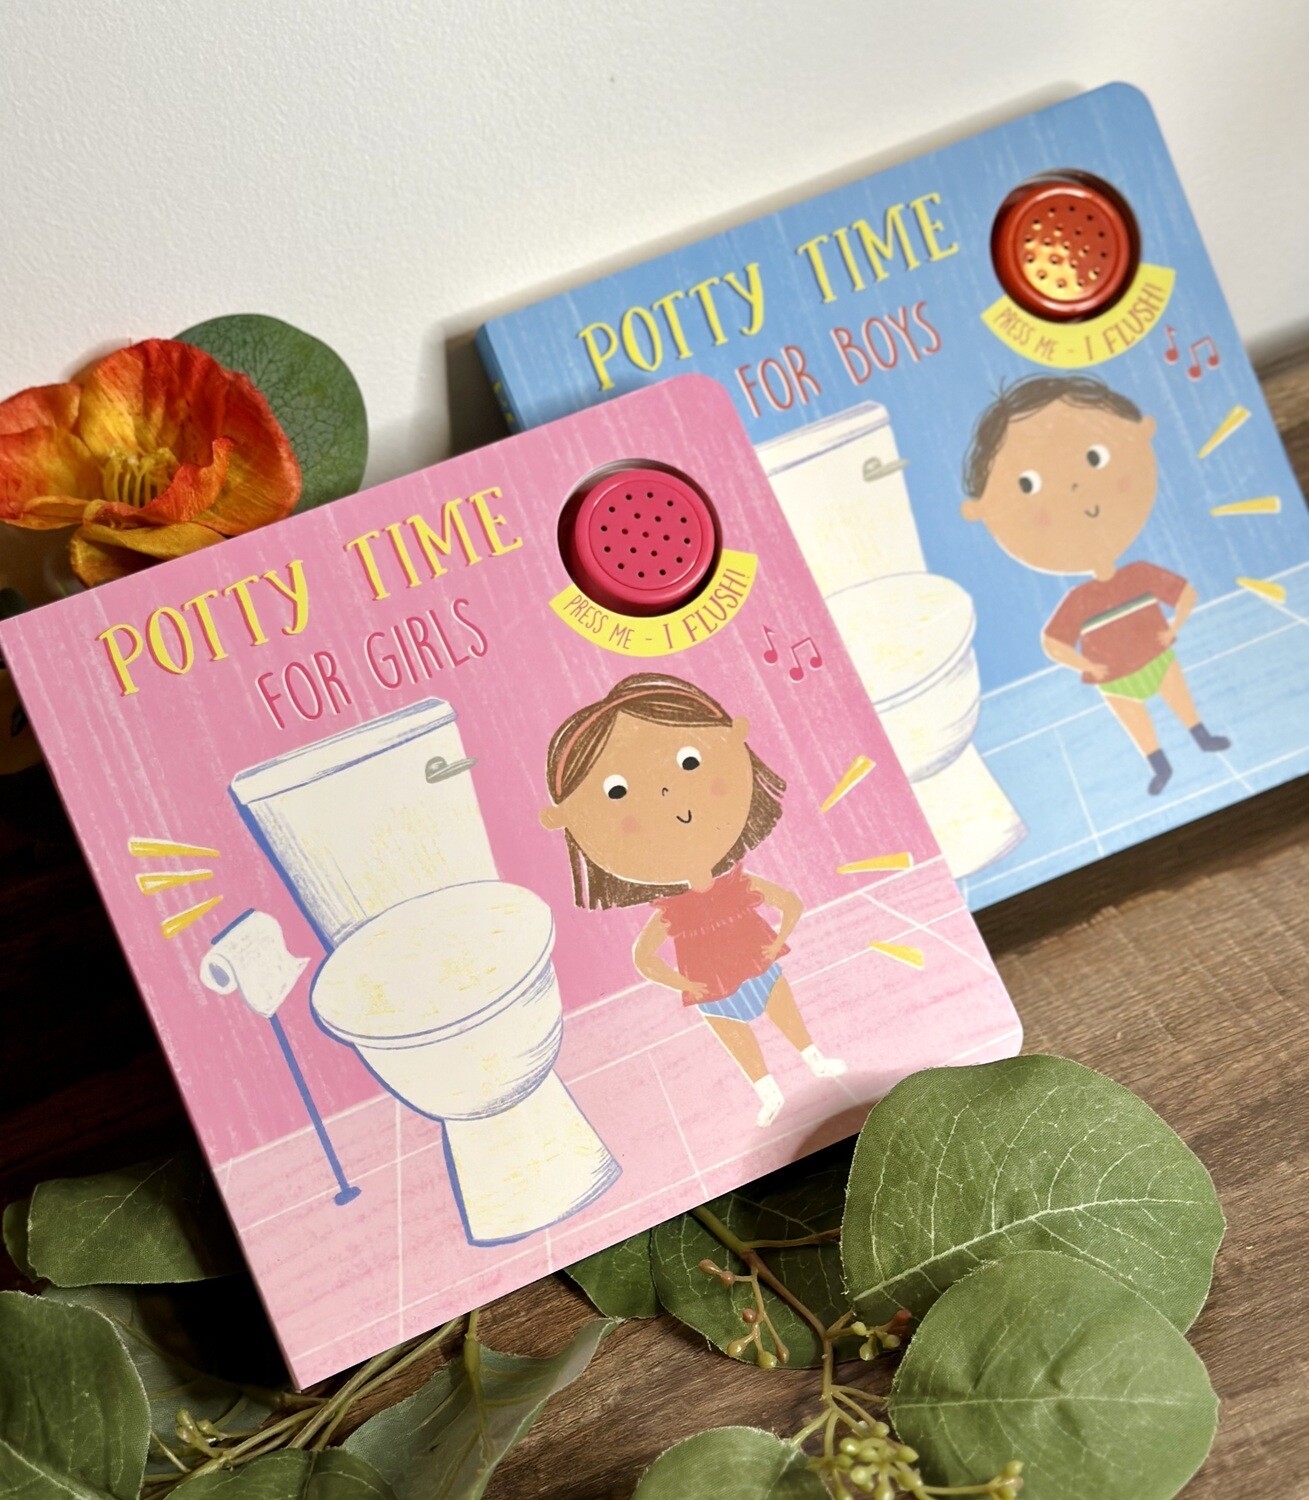 Potty Time Book